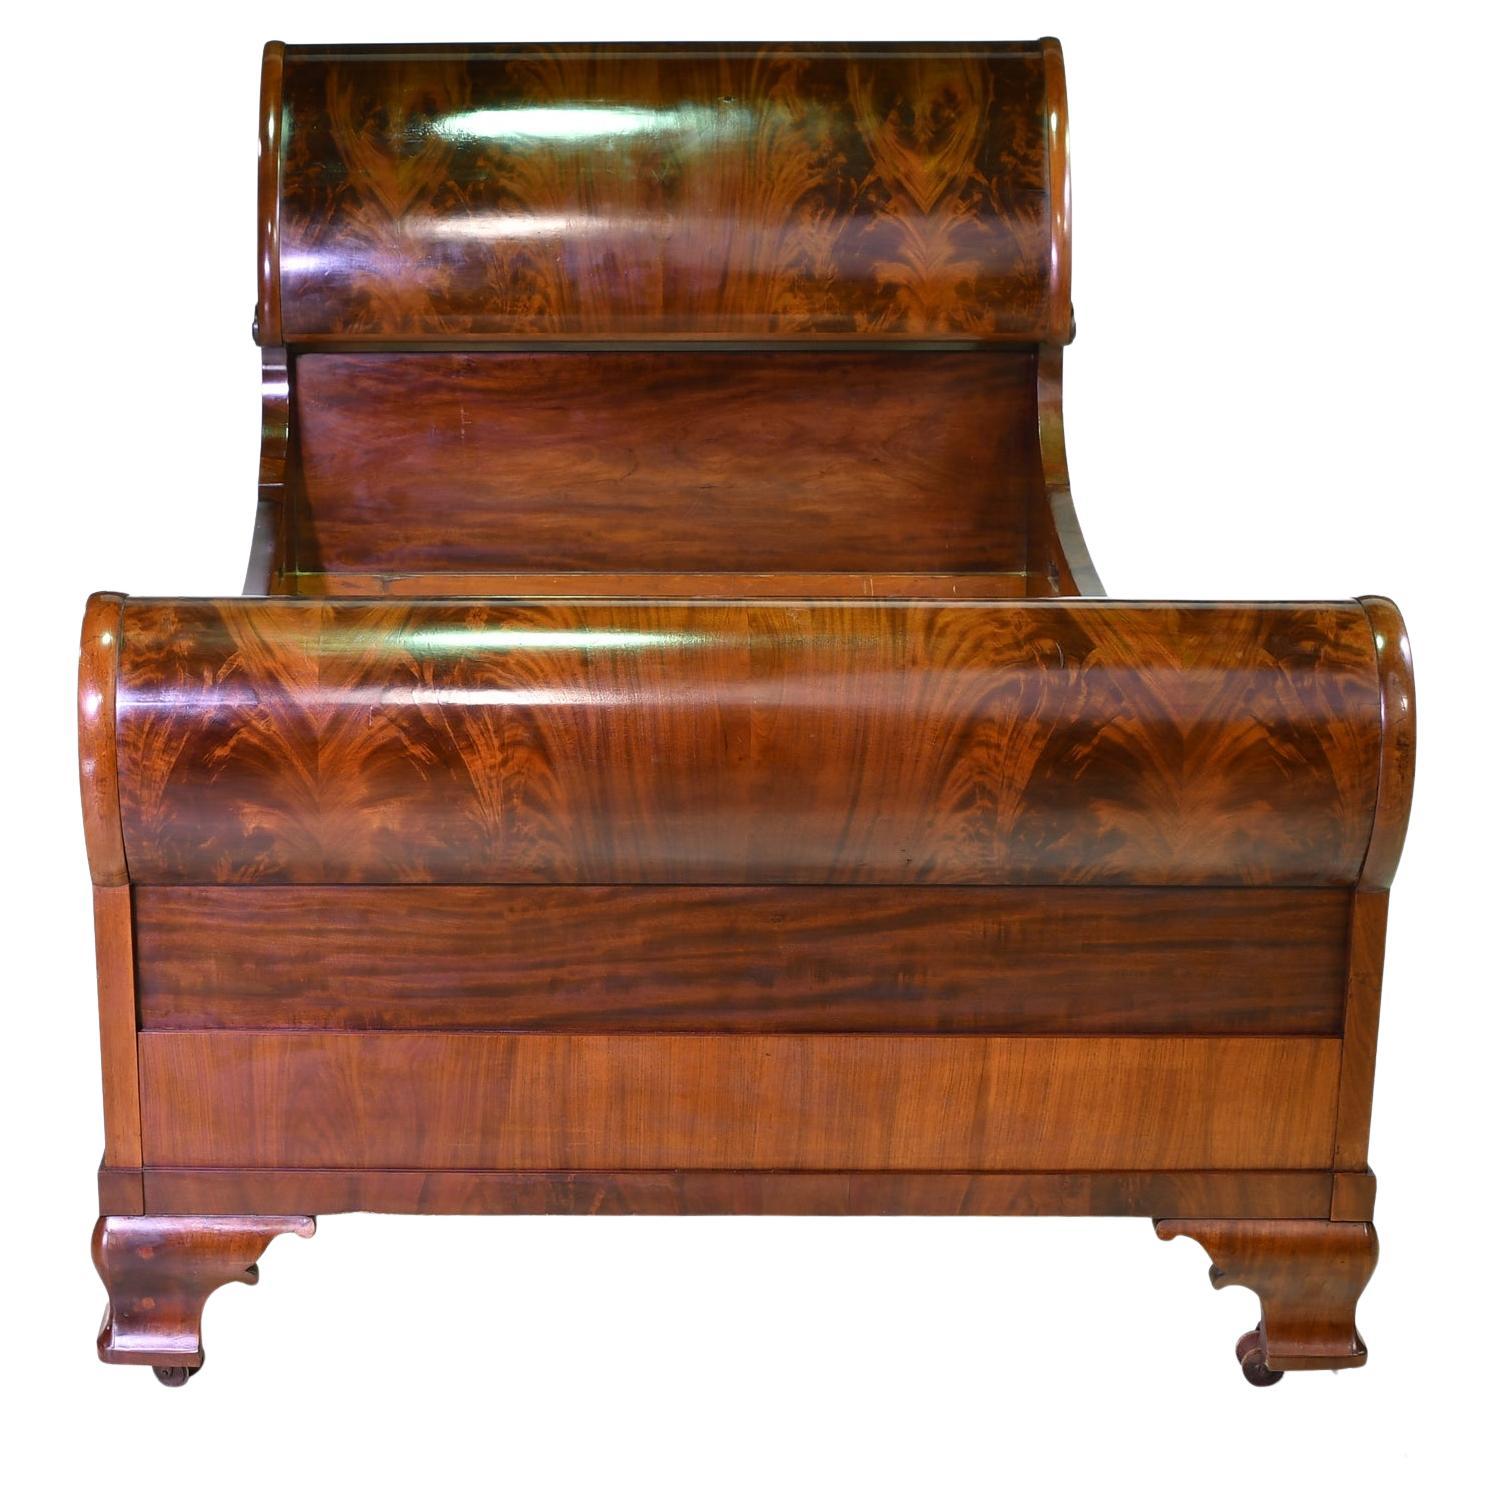 An exquisite classical American gondola sleigh bed in fine West Indies mahogany from the Federal period in Philadelphia, circa 1830. Inspired by the aesthetic ideals of ancient Greek & Roman furniture popularized during the Empire & Federal period,